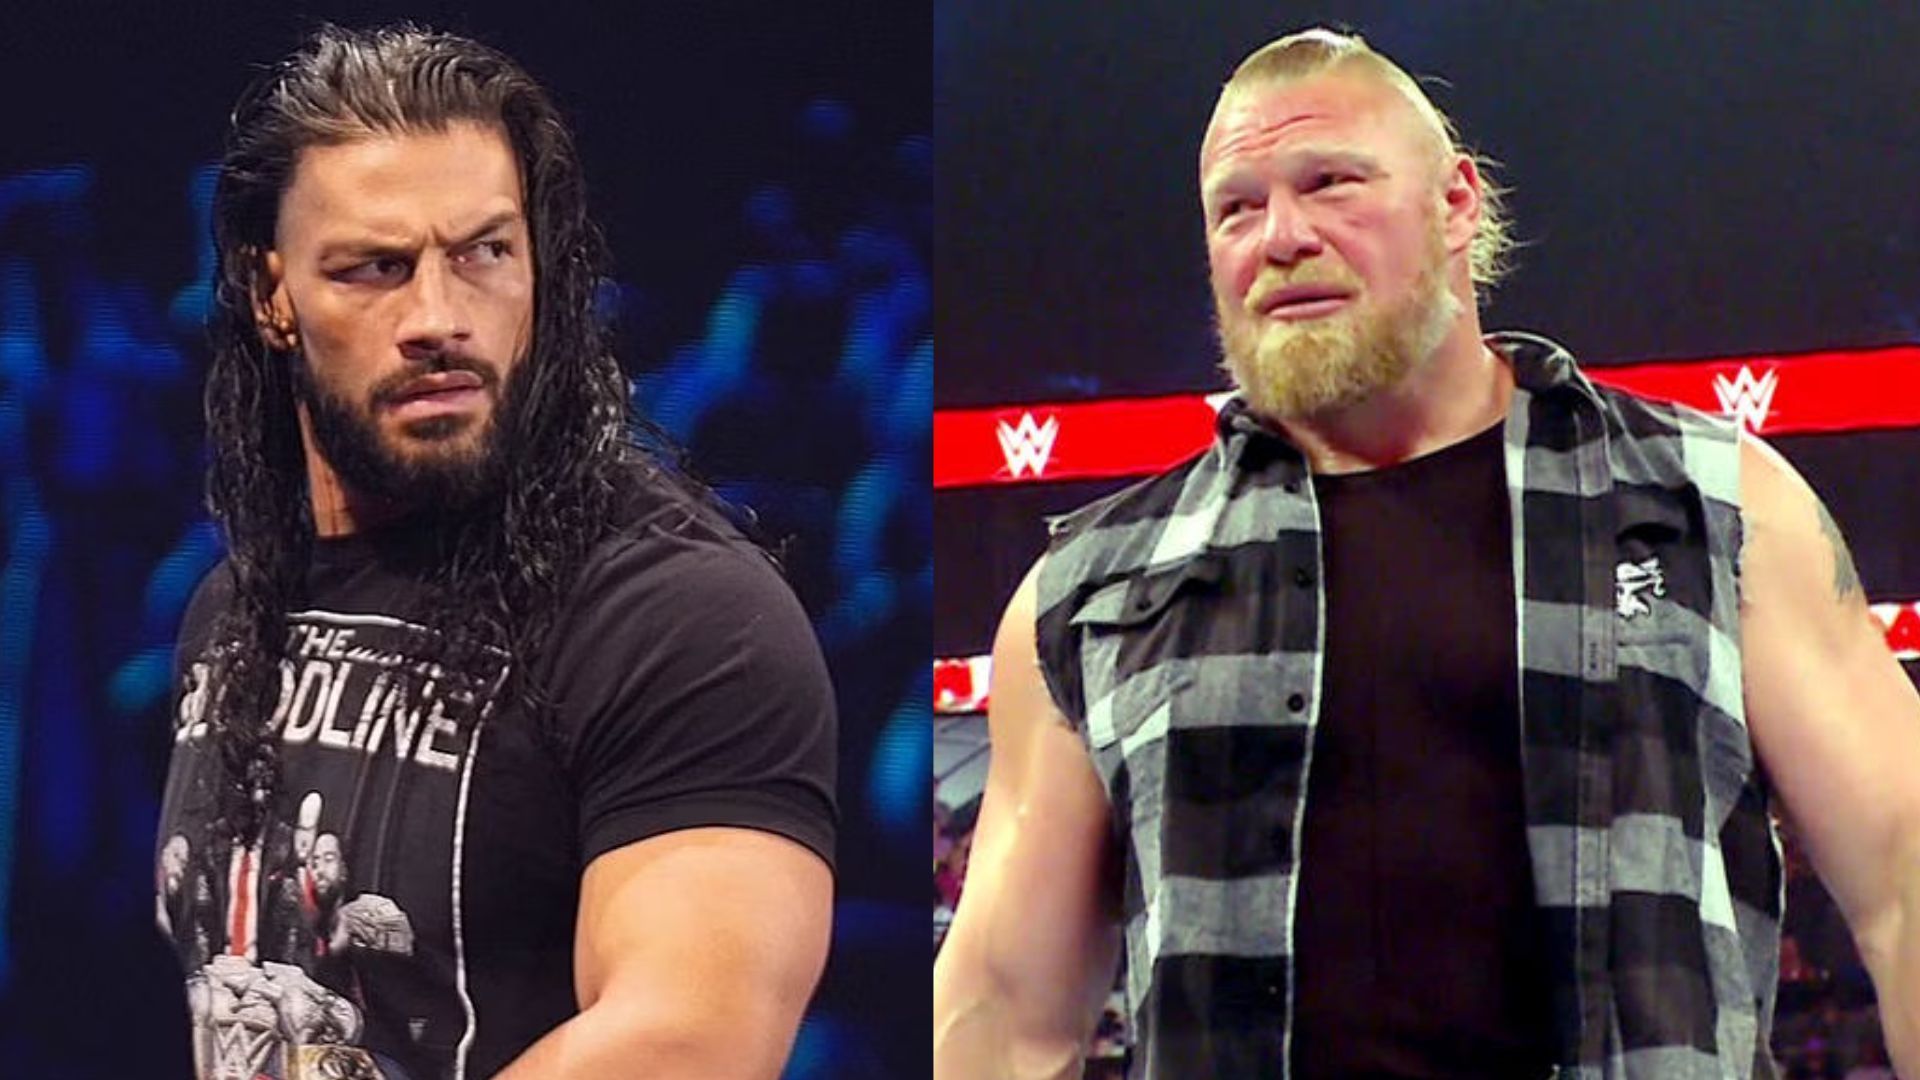 Roman Reigns and Brock Lesnar are on top of his list